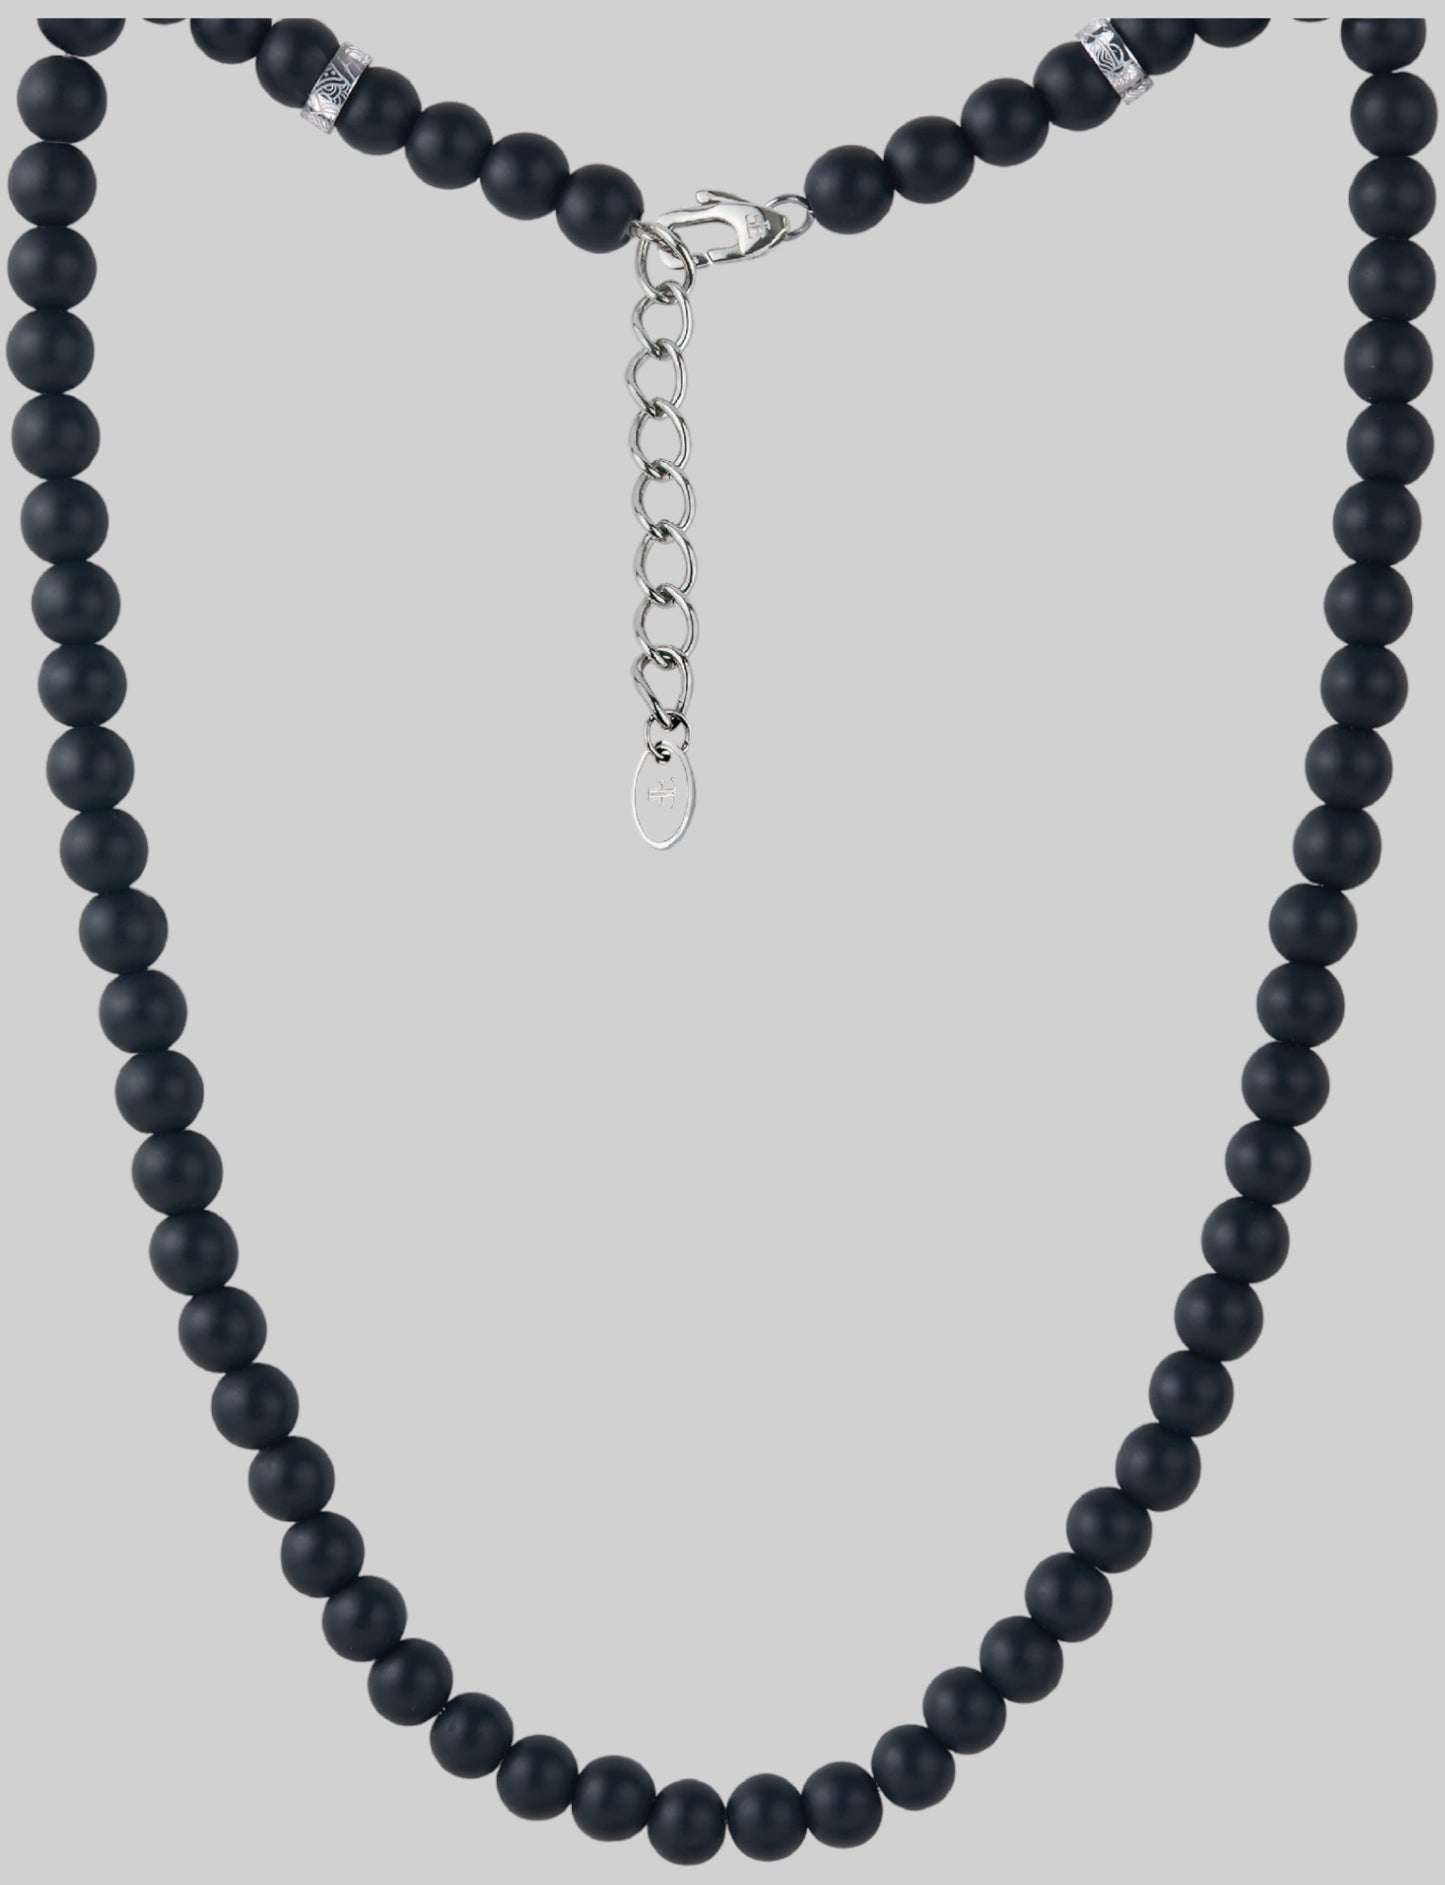 8mm Onyx Bead Necklace "FORTIER"